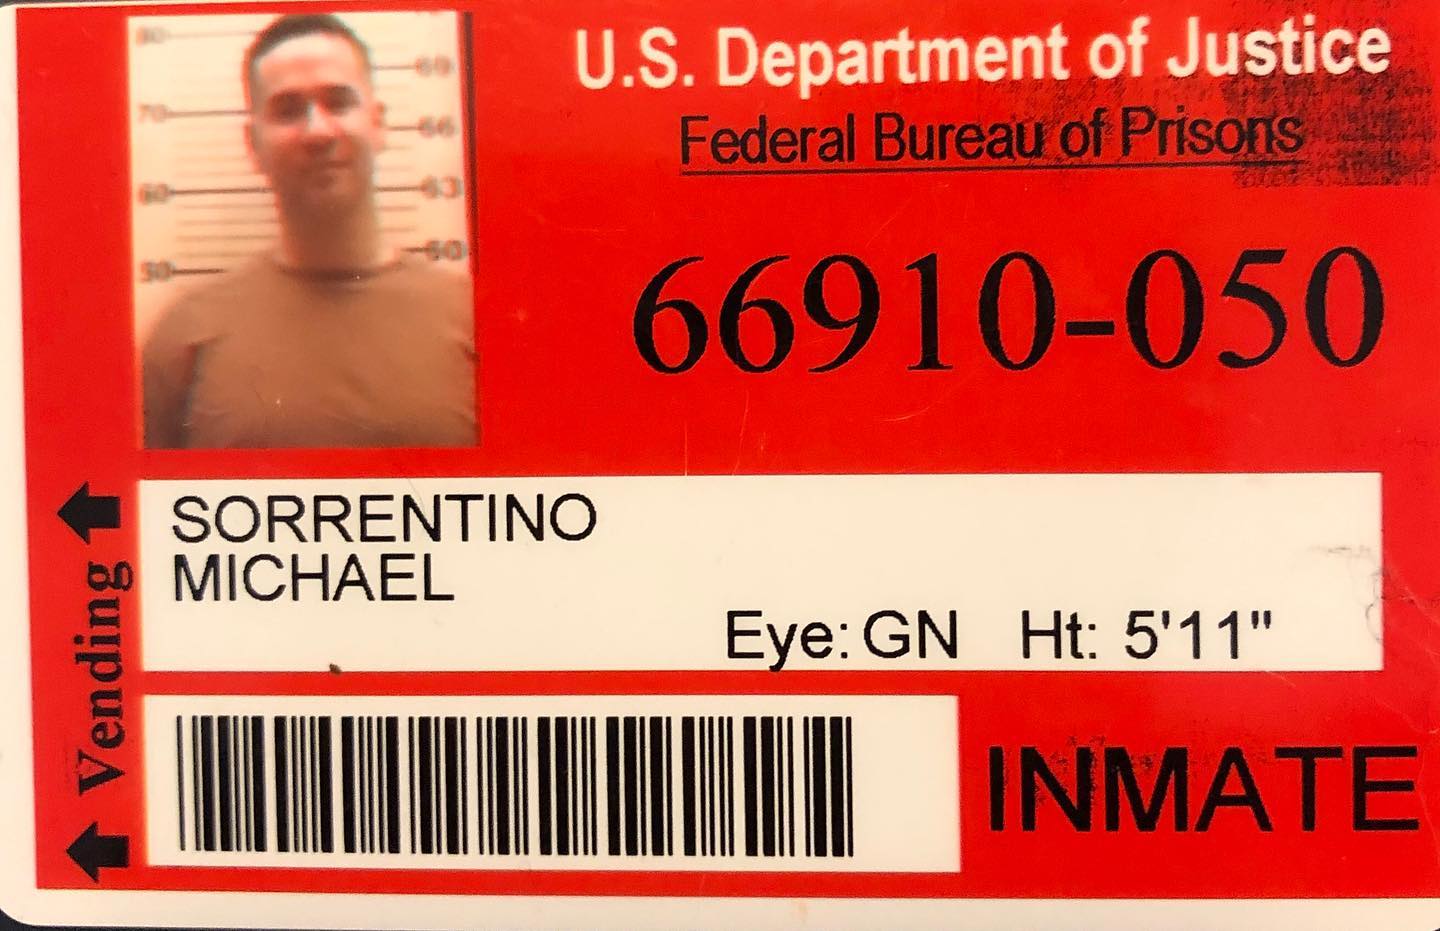 Mike released his prison ID